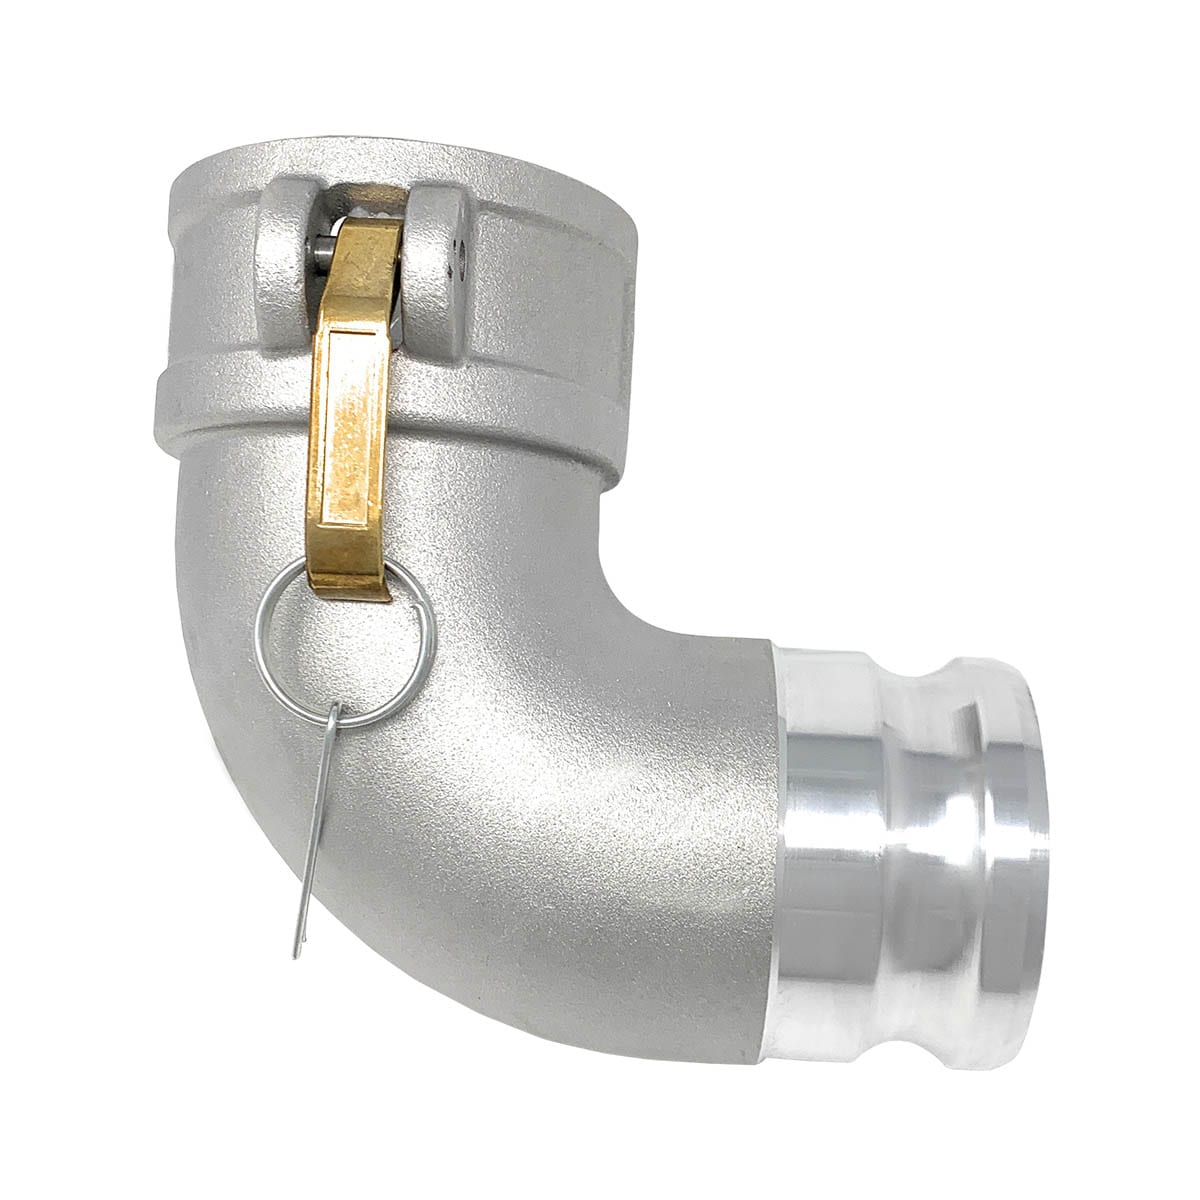 C Cam & Groove 3/4-4" Type E Camlock Hose Coupling Fitting Male Female